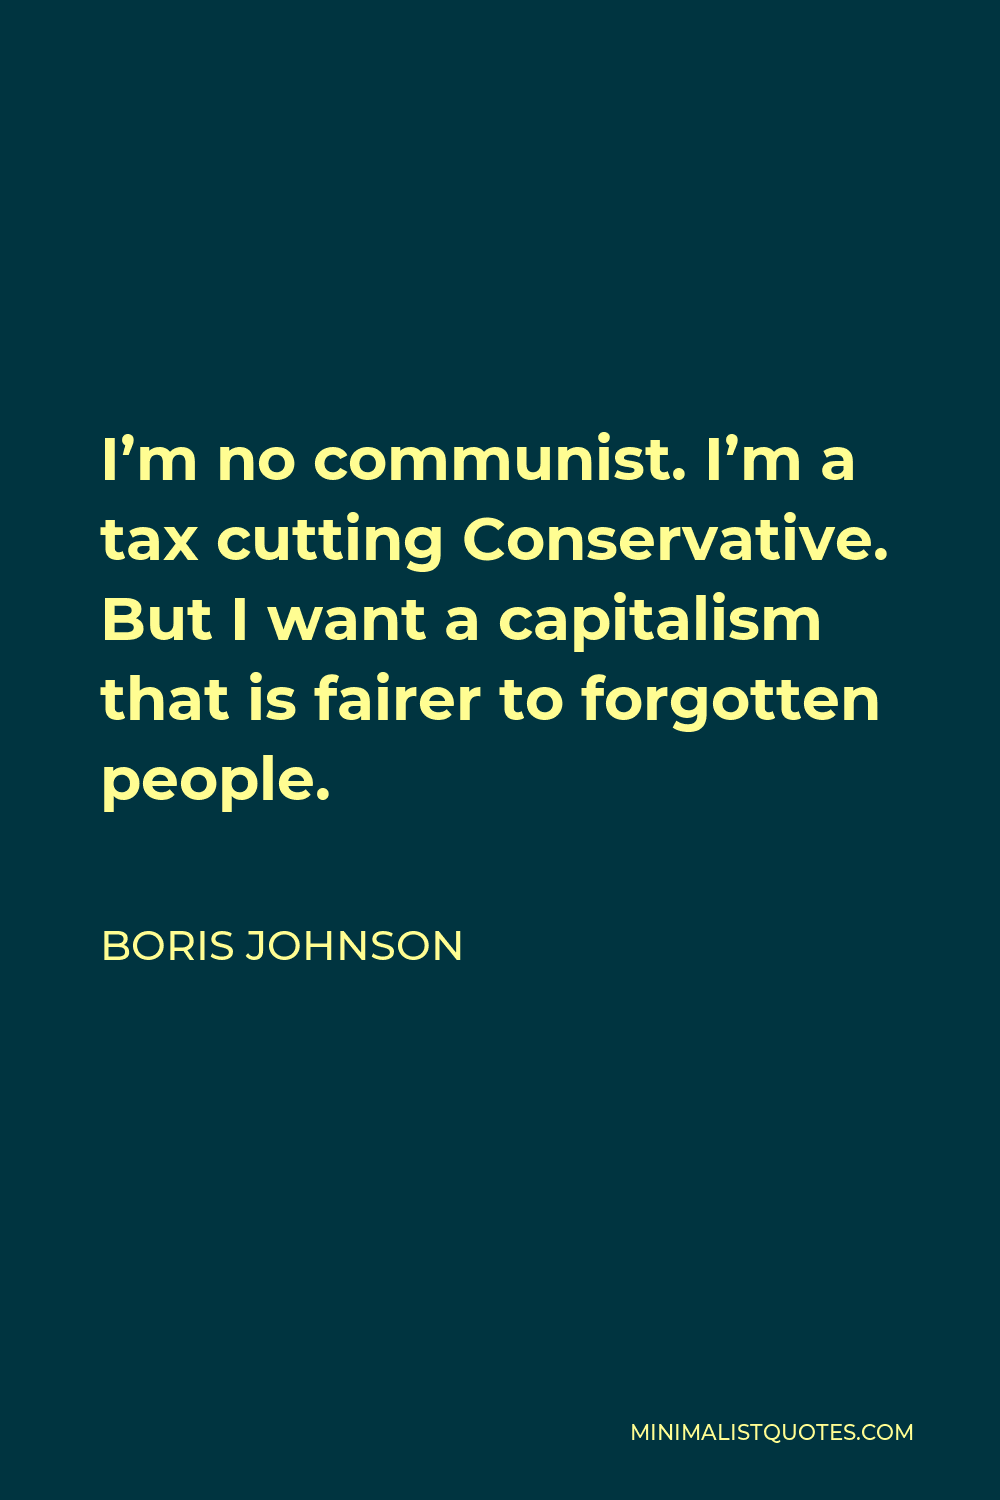 Boris Johnson Quote - I’m no communist. I’m a tax cutting Conservative. But I want a capitalism that is fairer to forgotten people.